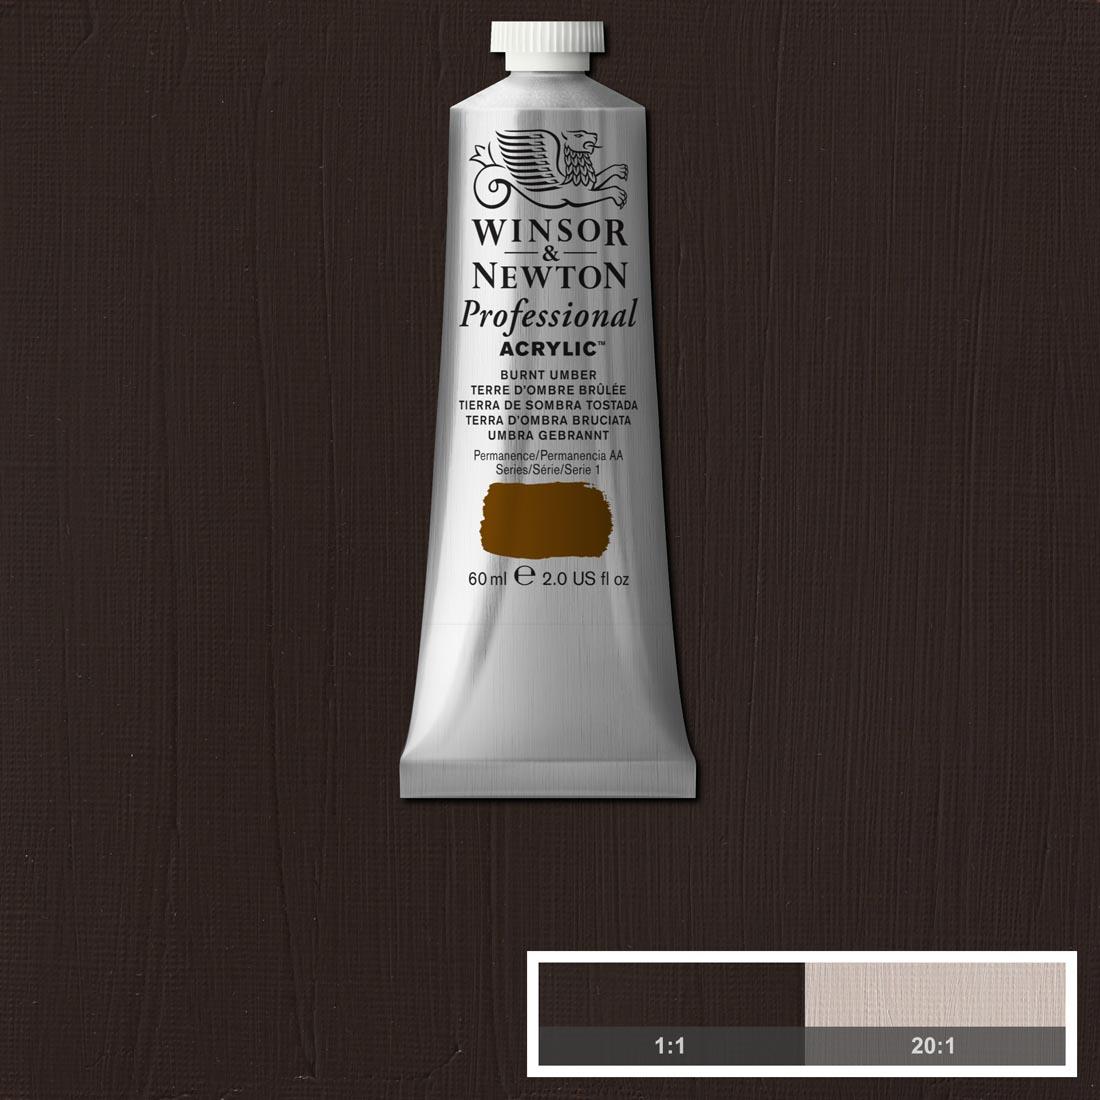 Tube of Winsor and Newton Professional Acrylic Burnt Umber with paint swatch in the background